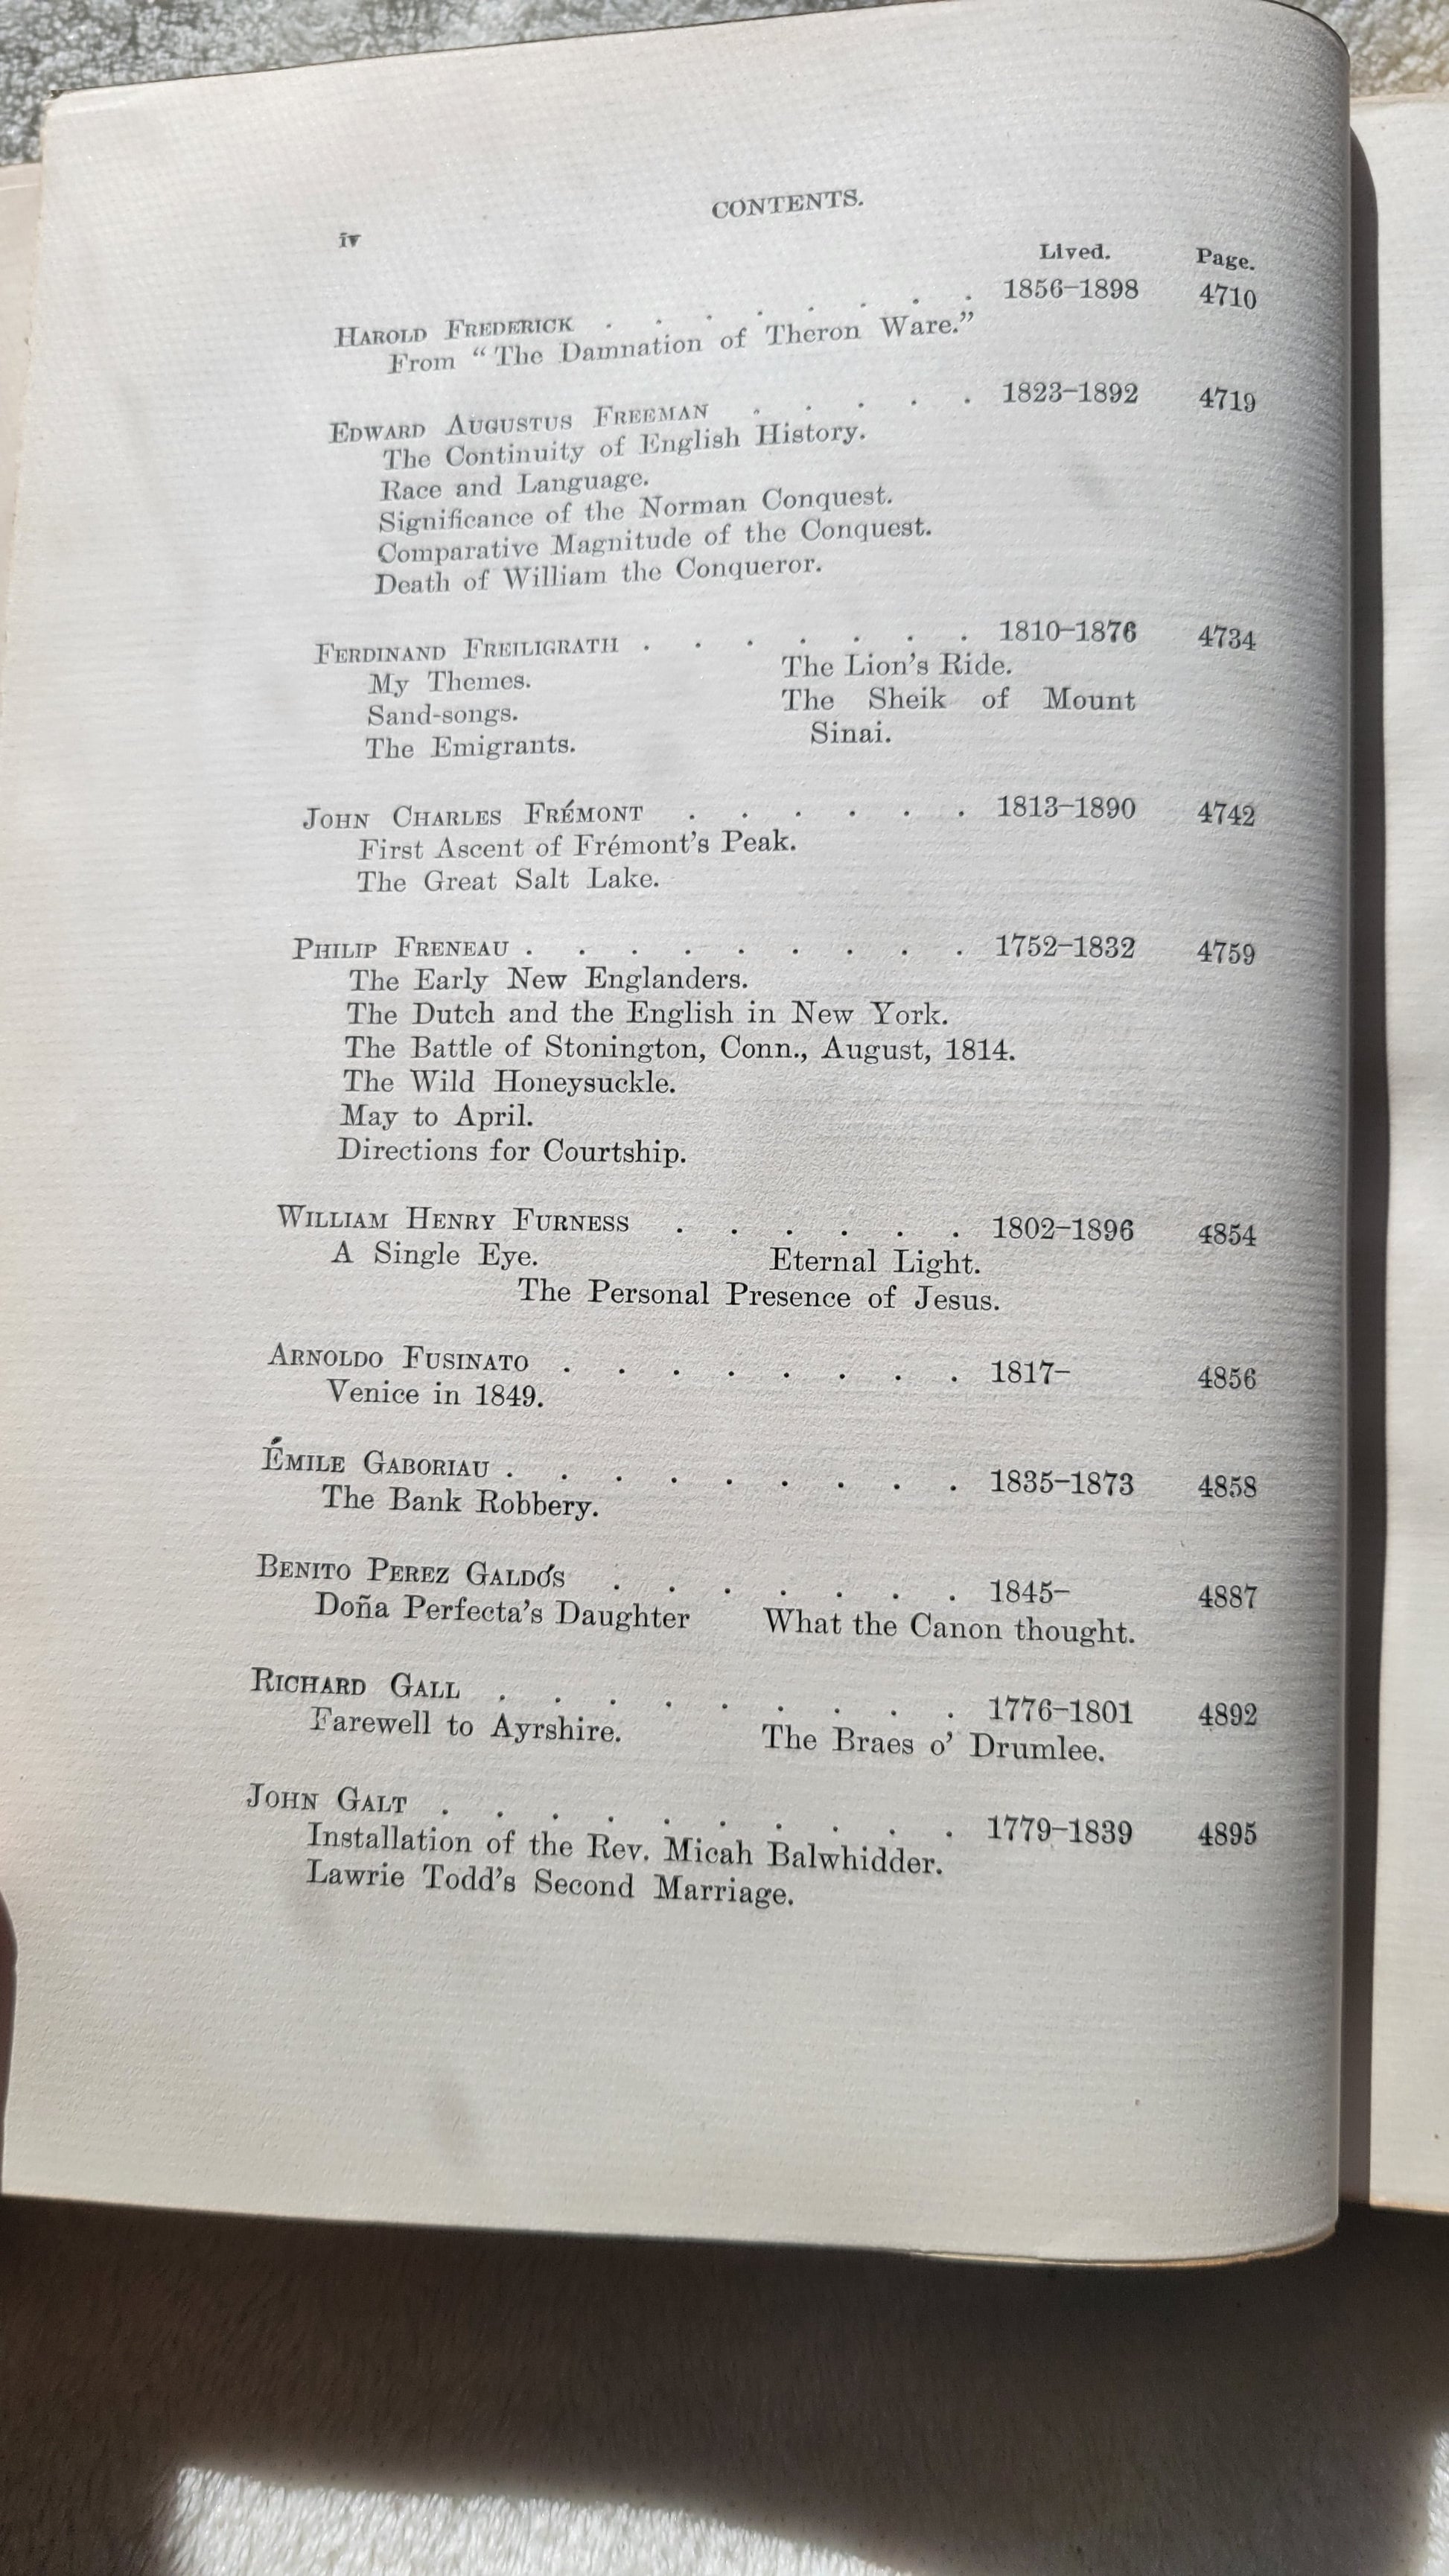 Antique book.  "Bibliophile Edition de Luxe Volume 13" part of The International Library of Masterpieces, Literature, Art, and Rare Manuscripts, edited by Herry Thurston Peck, published by The International Bibliophile Society, 1901.  View of table of contents.